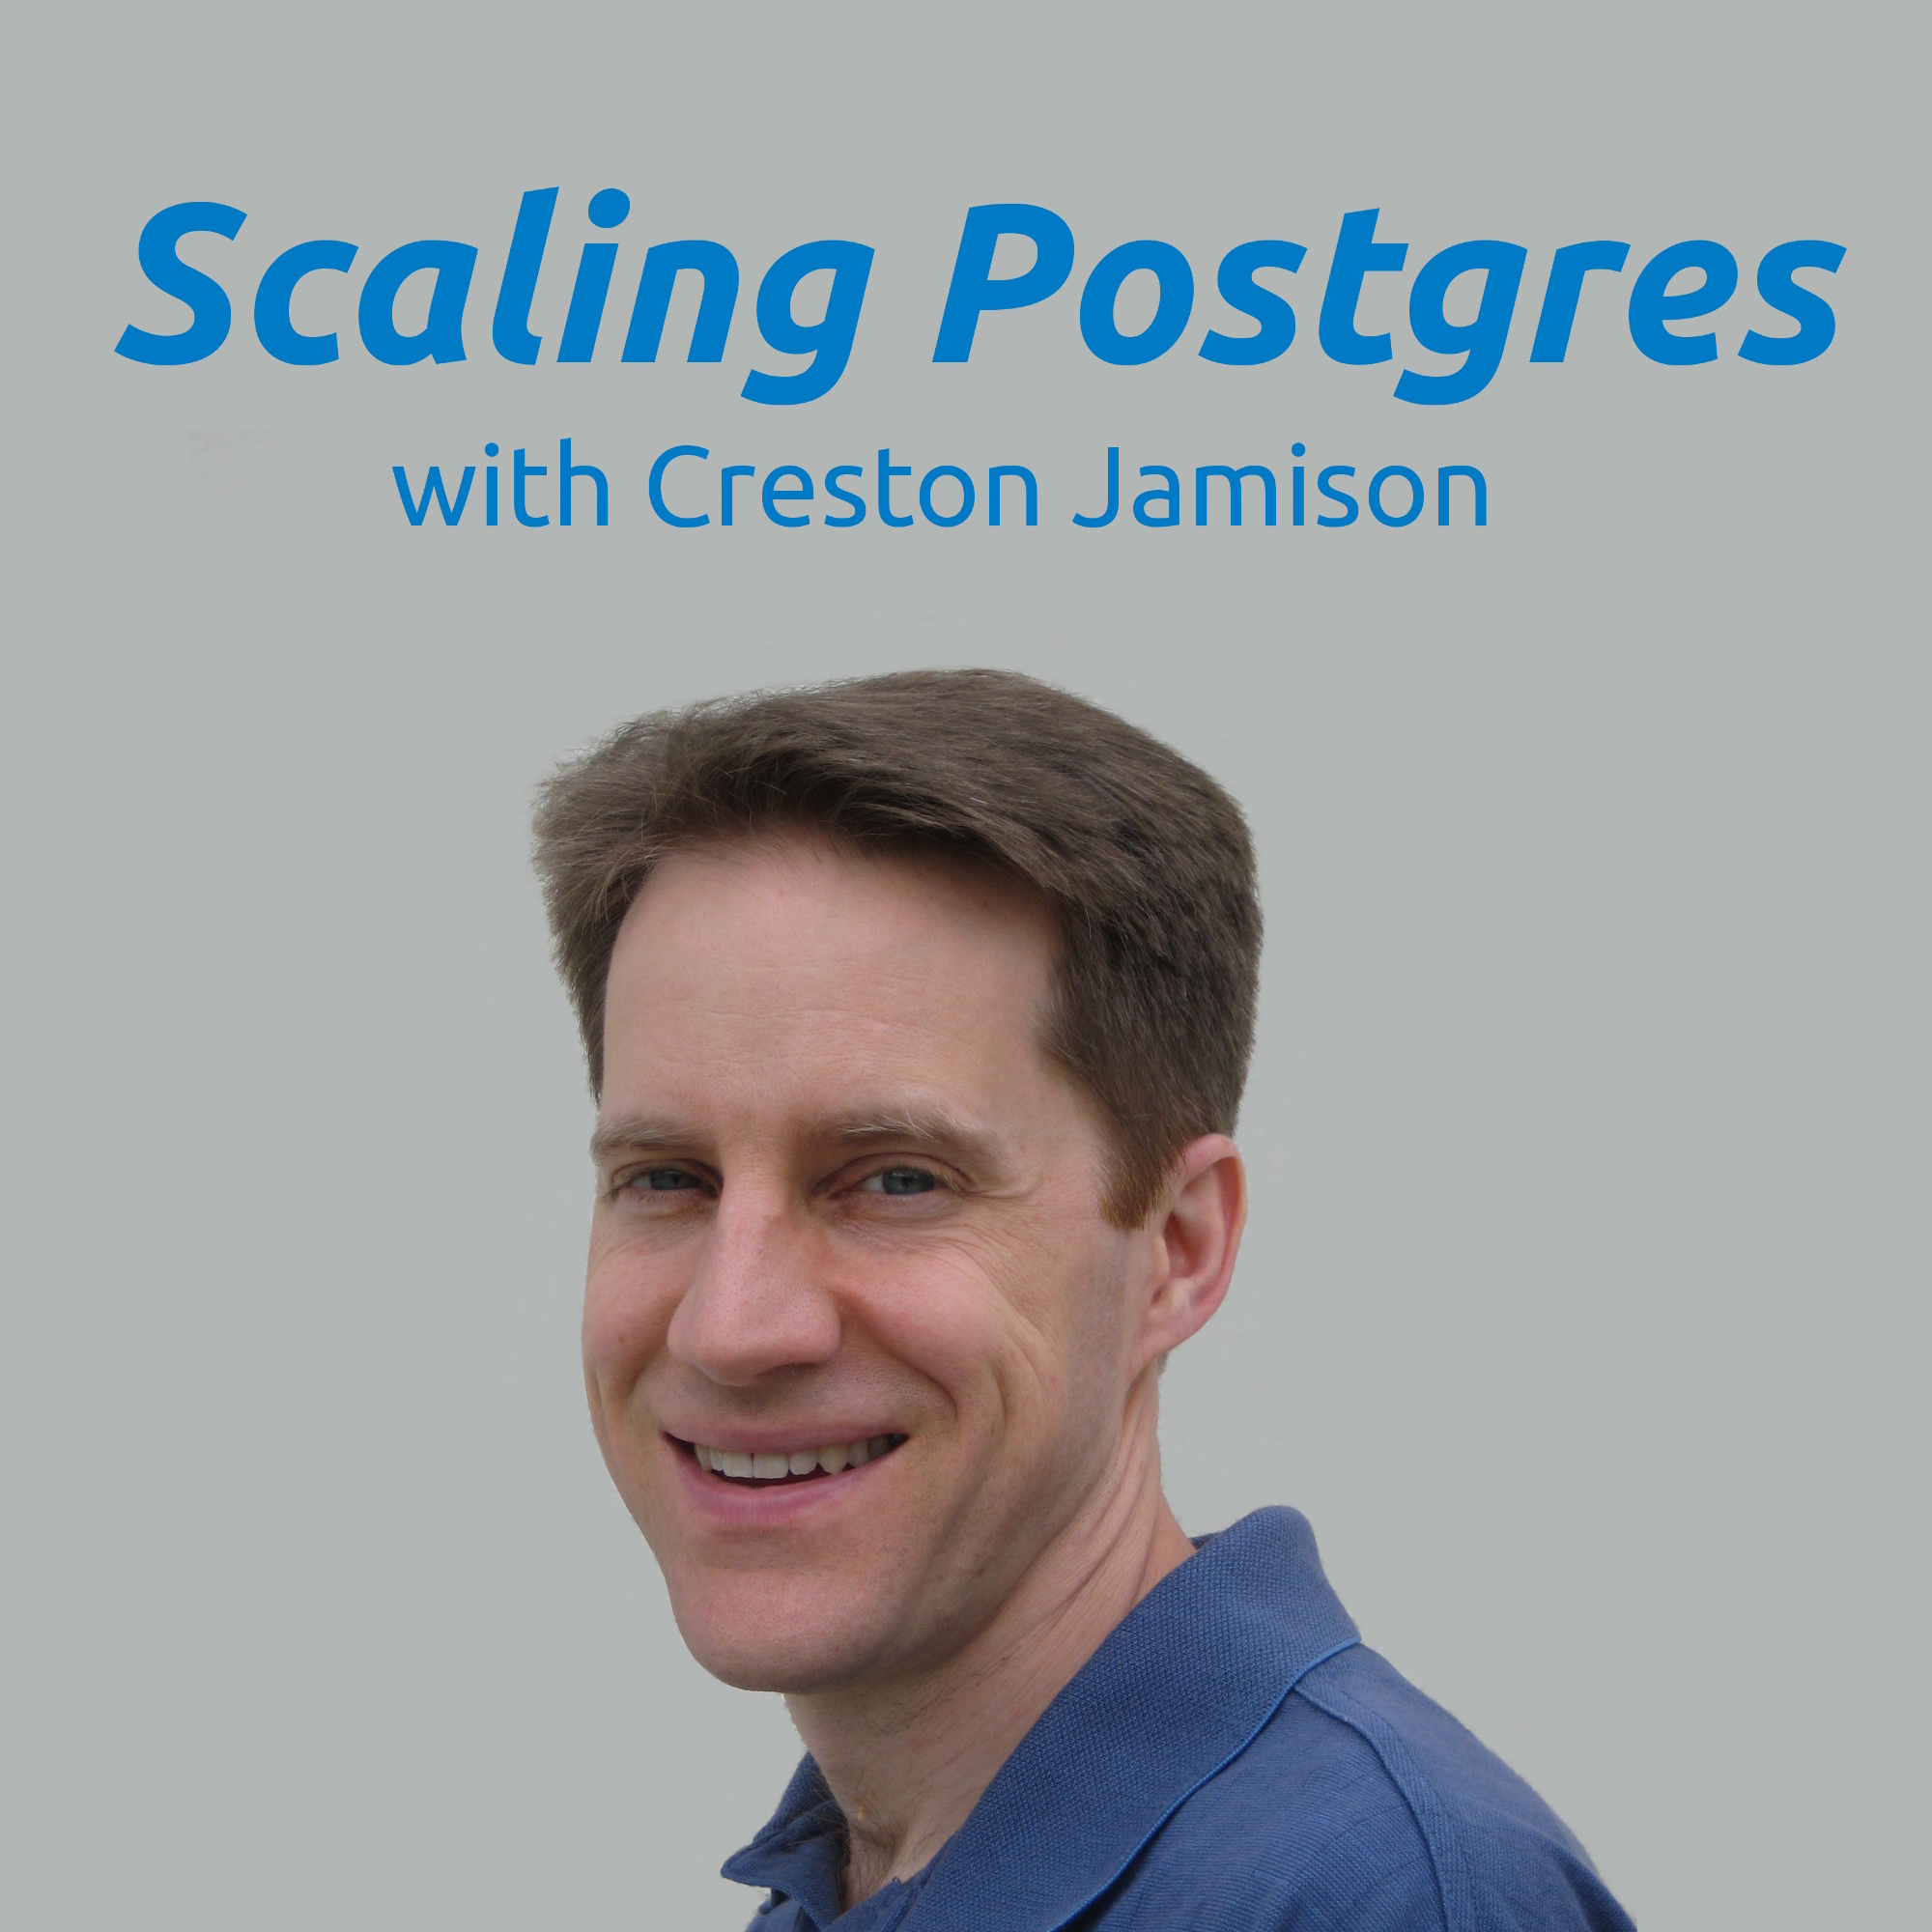 New Postgres Releases, Privilege Escalation CVE, Chaos Testing, High Availability | Scaling Postgres 228